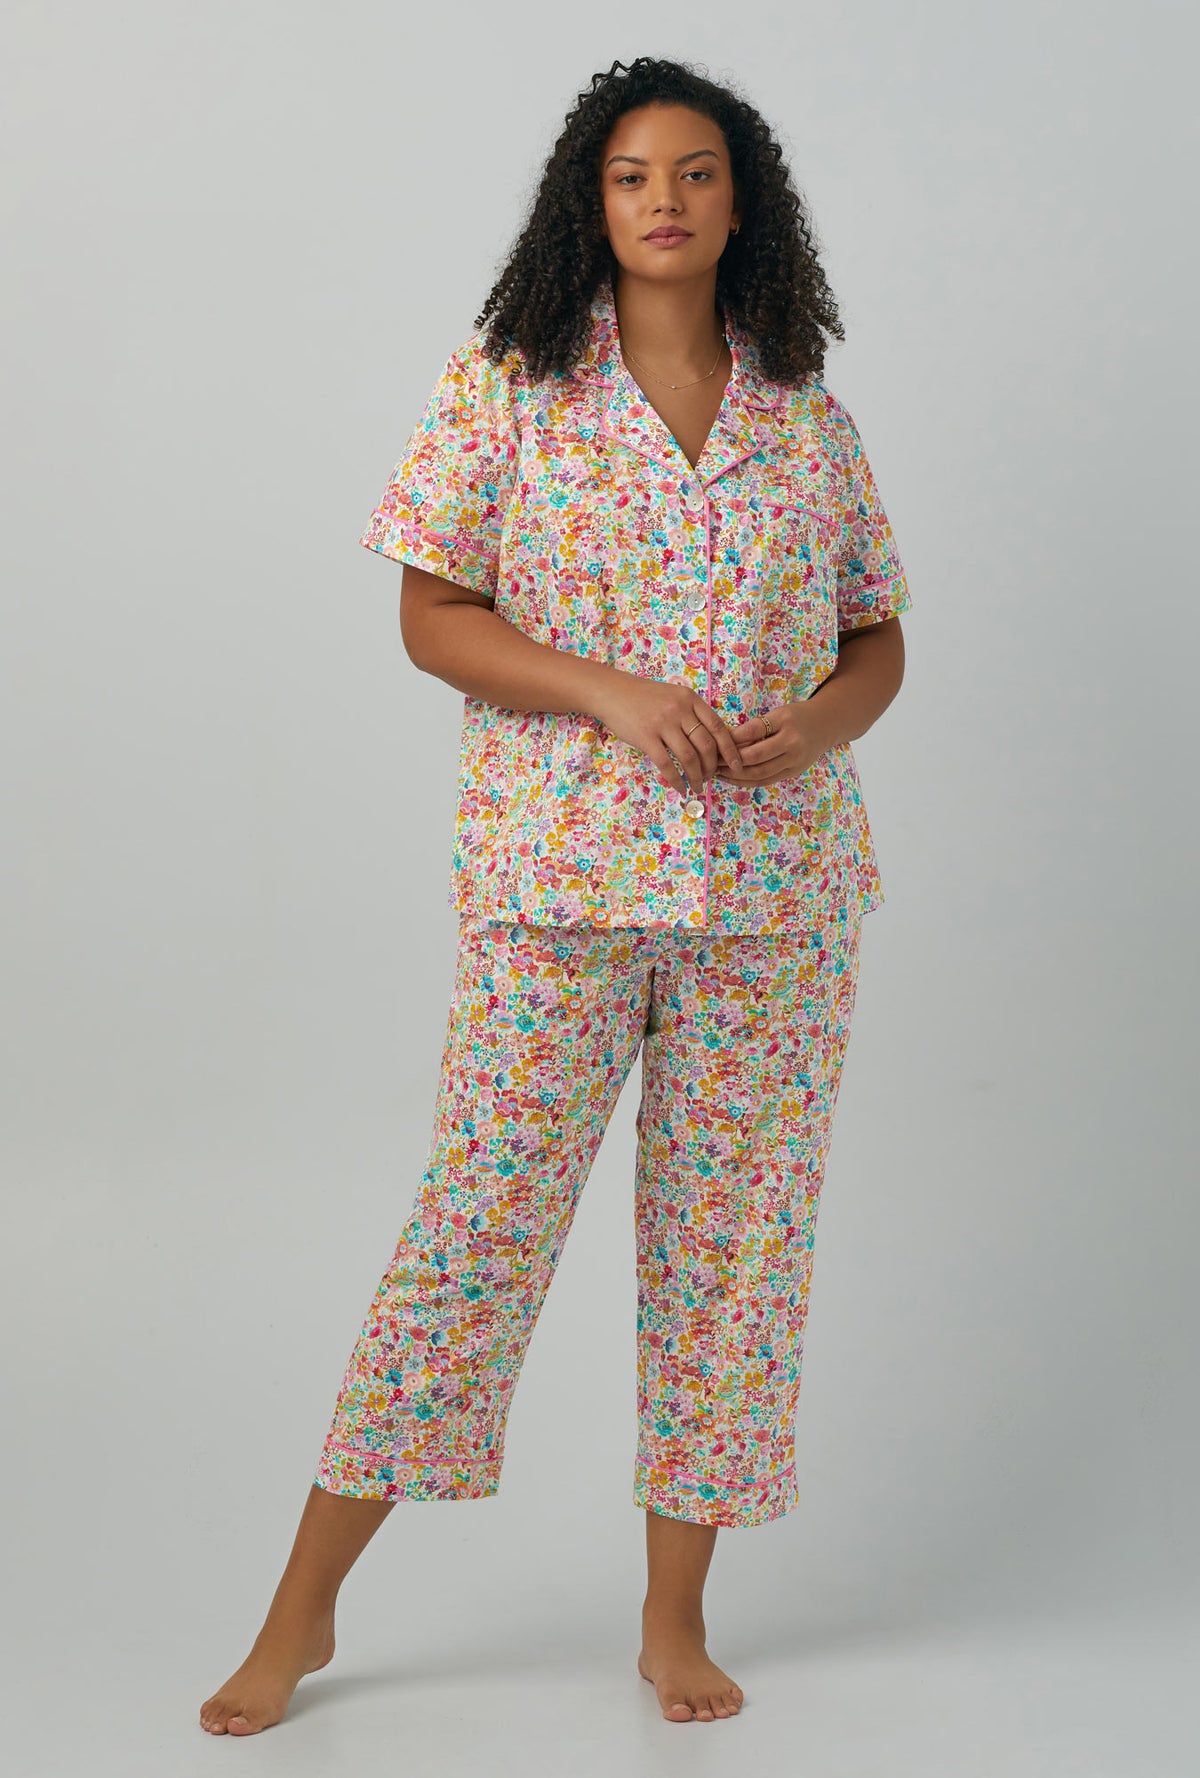 A lady wearing  multi color plus size  short Sleeve Classic Woven Cotton PJ Set with Classic Meadow print